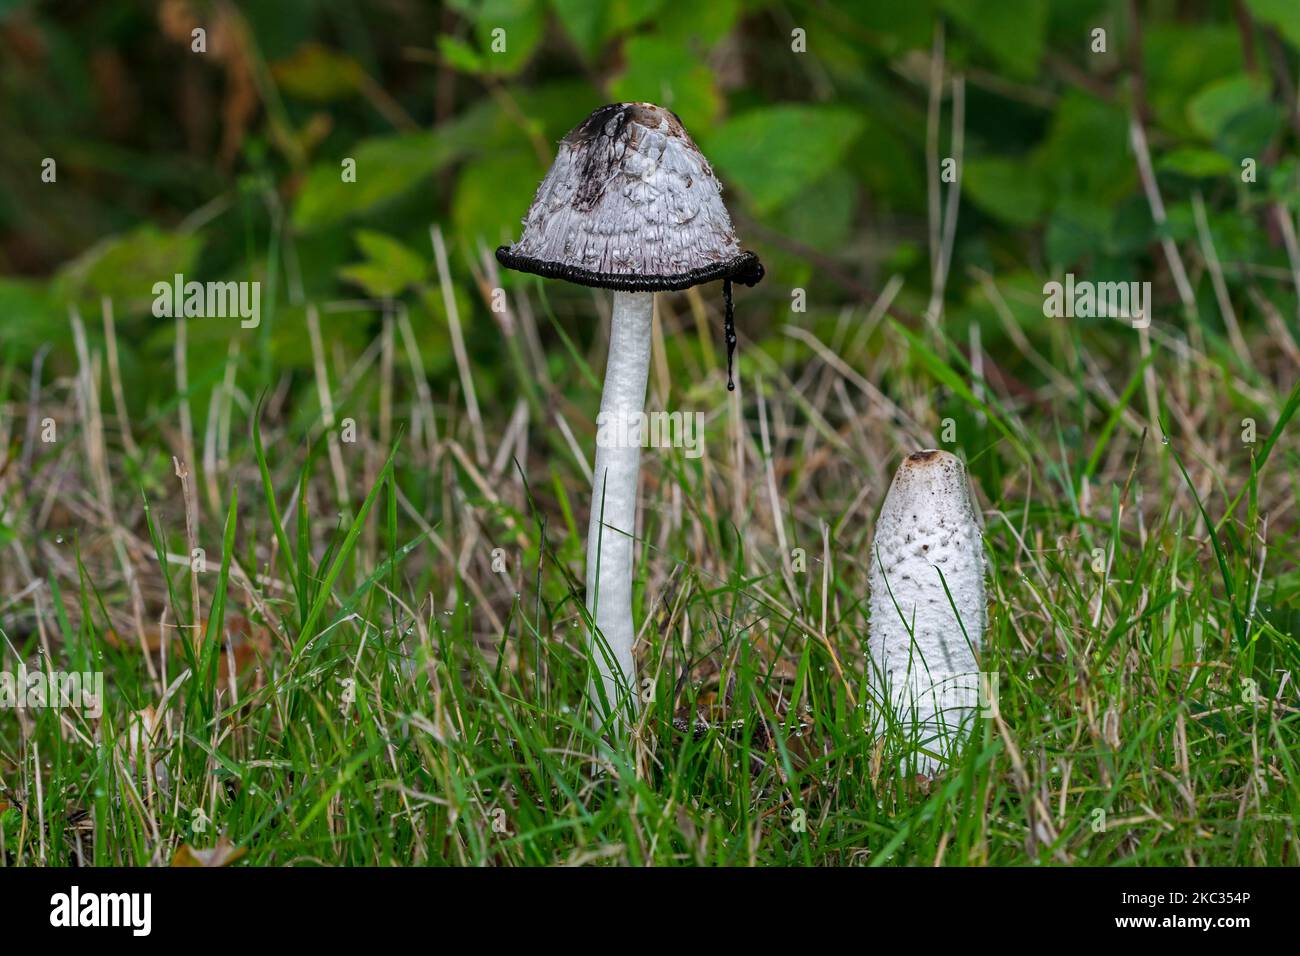 Shaggy ink cap / lawyer's wig / shaggy mane fungus (Coprinus comatus), young fruiting body and mature mushroom in forest in autumn / fall Stock Photo